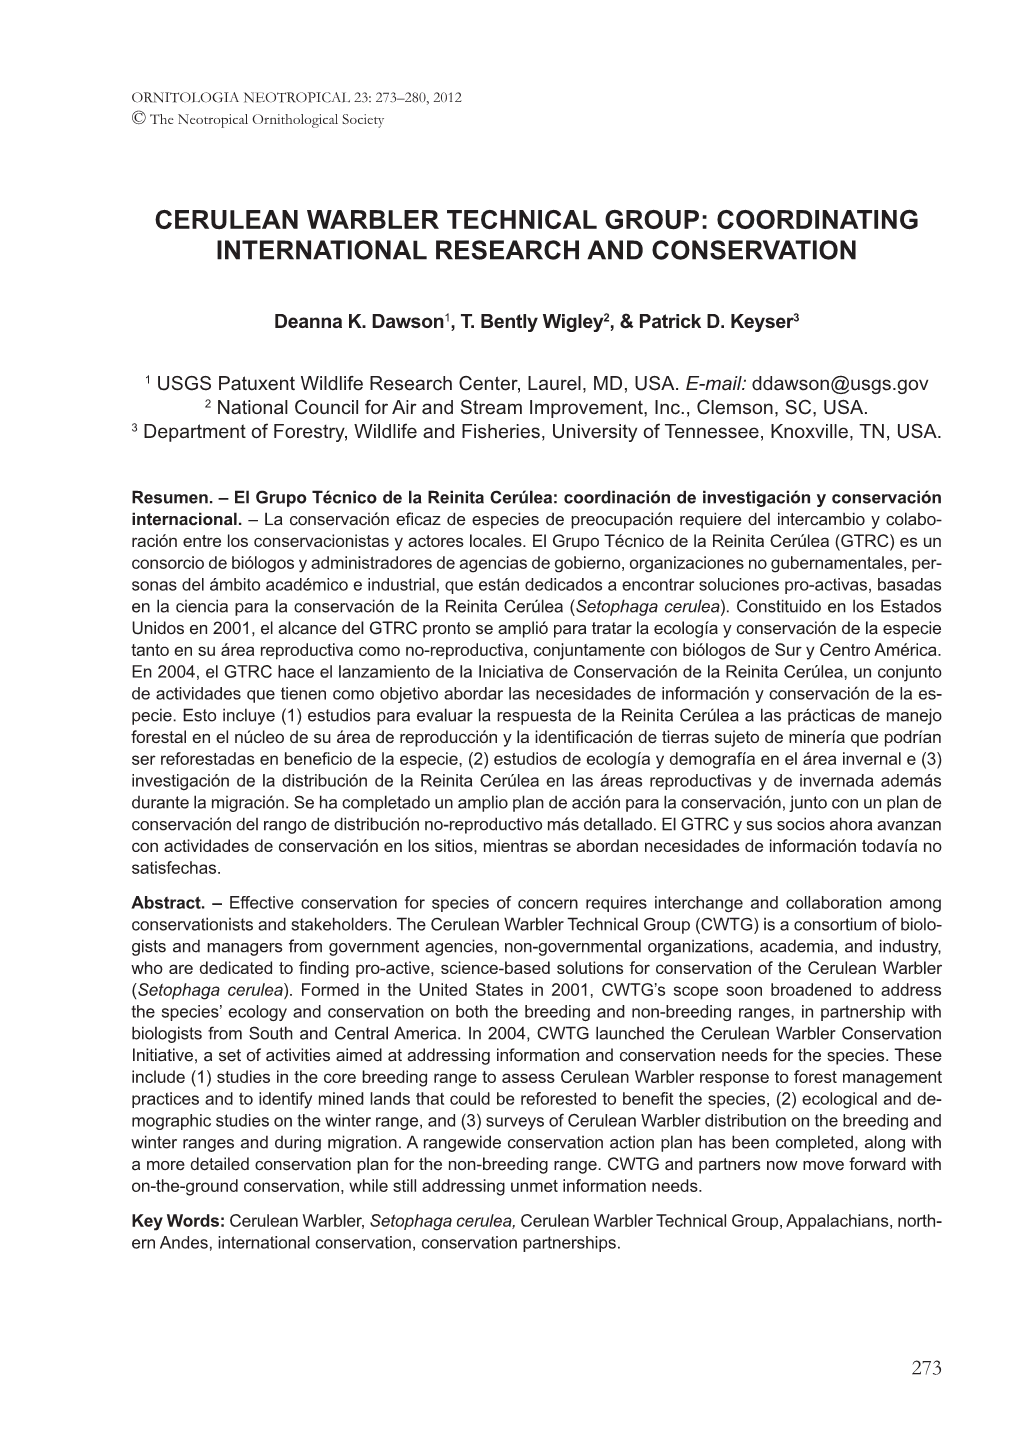 Cerulean Warbler Technical Group: Coordinating International Research and Conservation